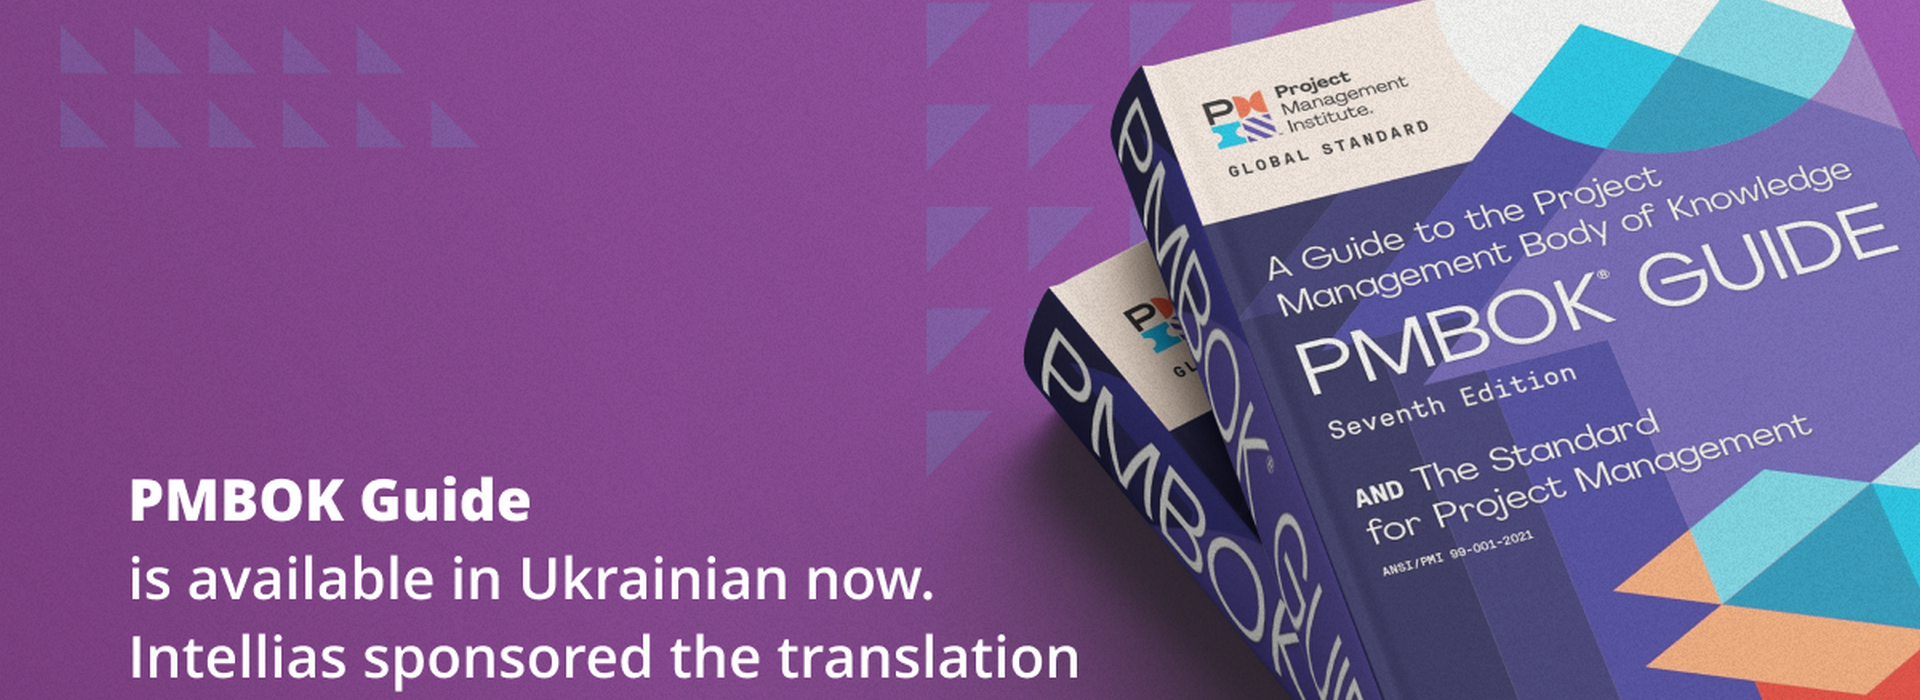 The Ukrainian Version of the PMBOK Guide Is Now Available for Free. Intellias Sponsored the Translation